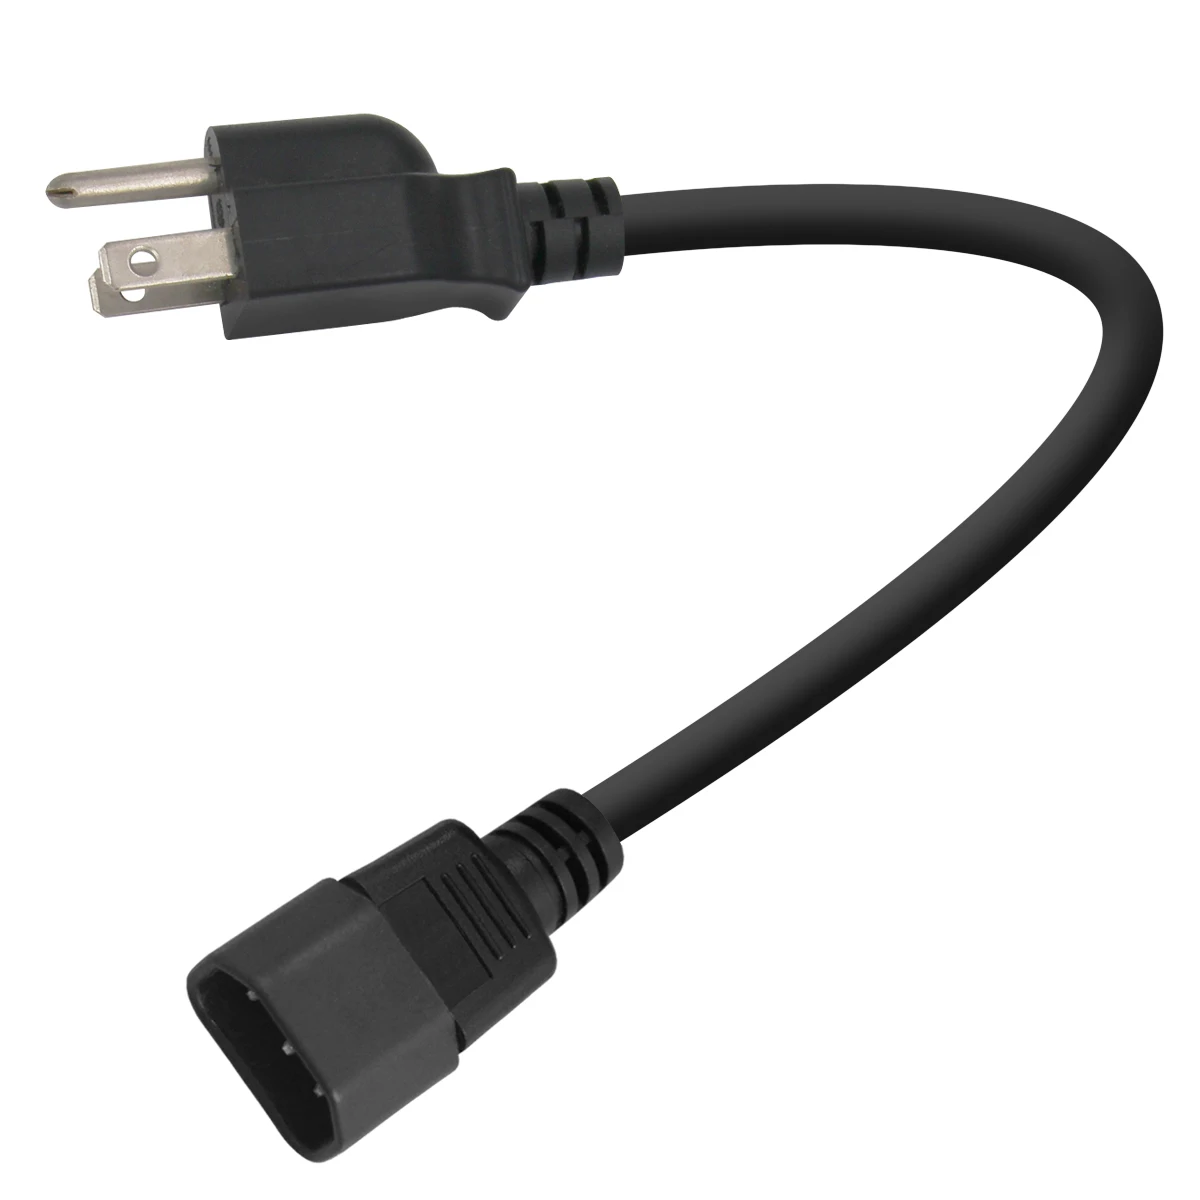 Wholesale Iec Extension Supply Cable Y Splitter 2 Ways IEC 320 2 X C13 To C20 Power Cord 23